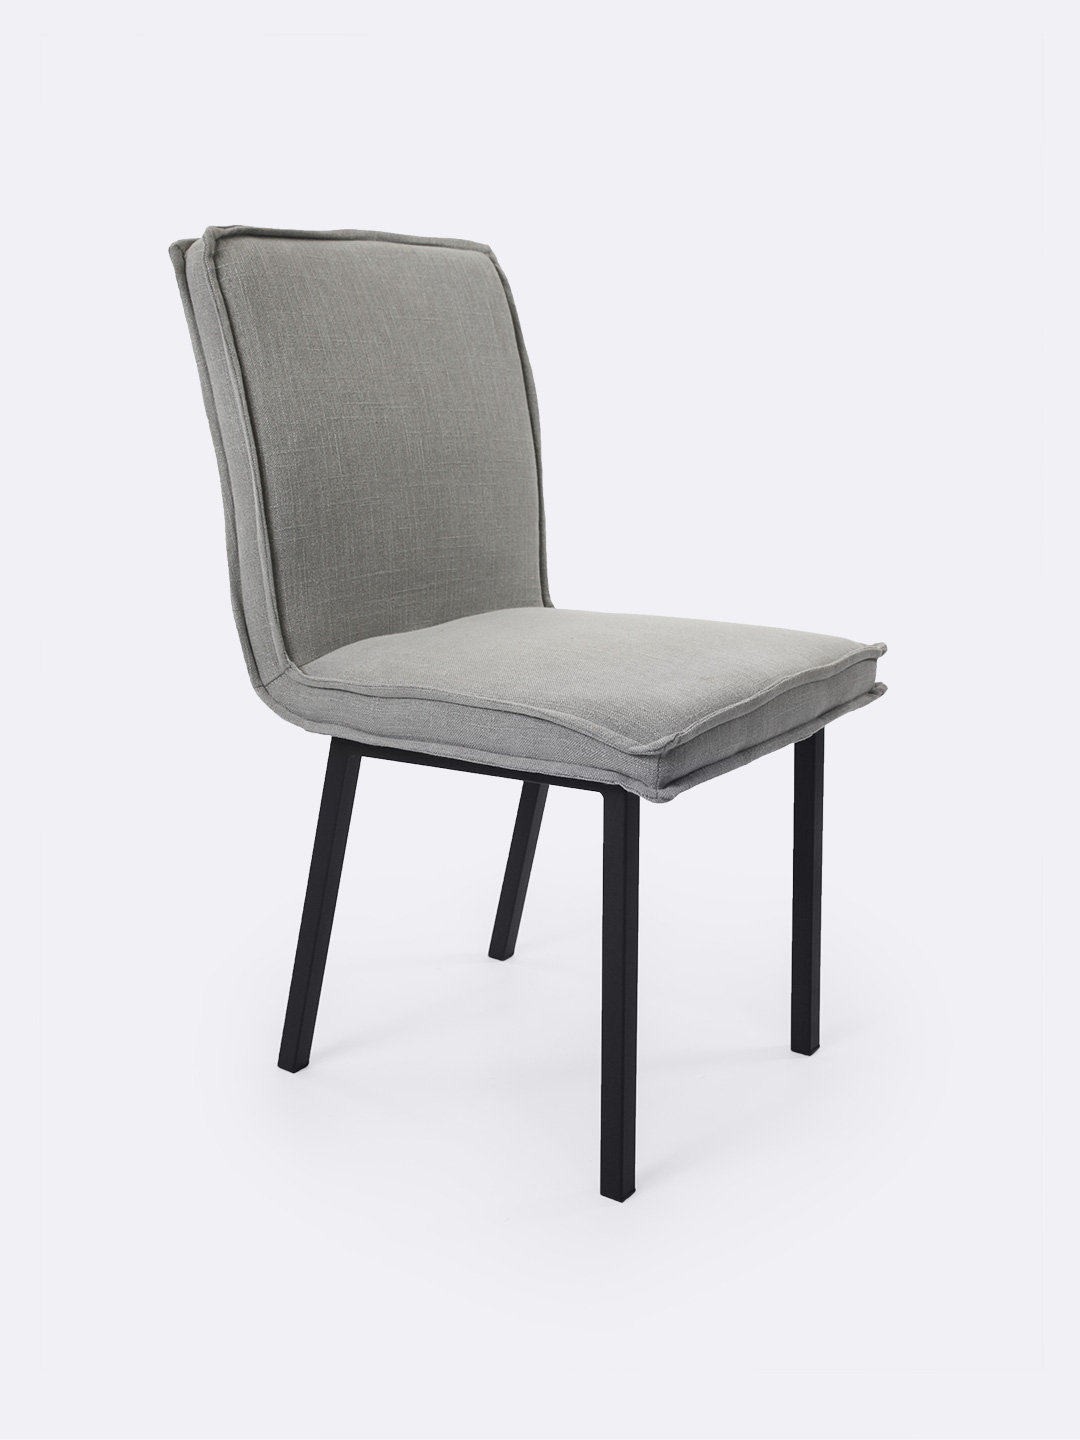 Bella Dining Chair in dove grey